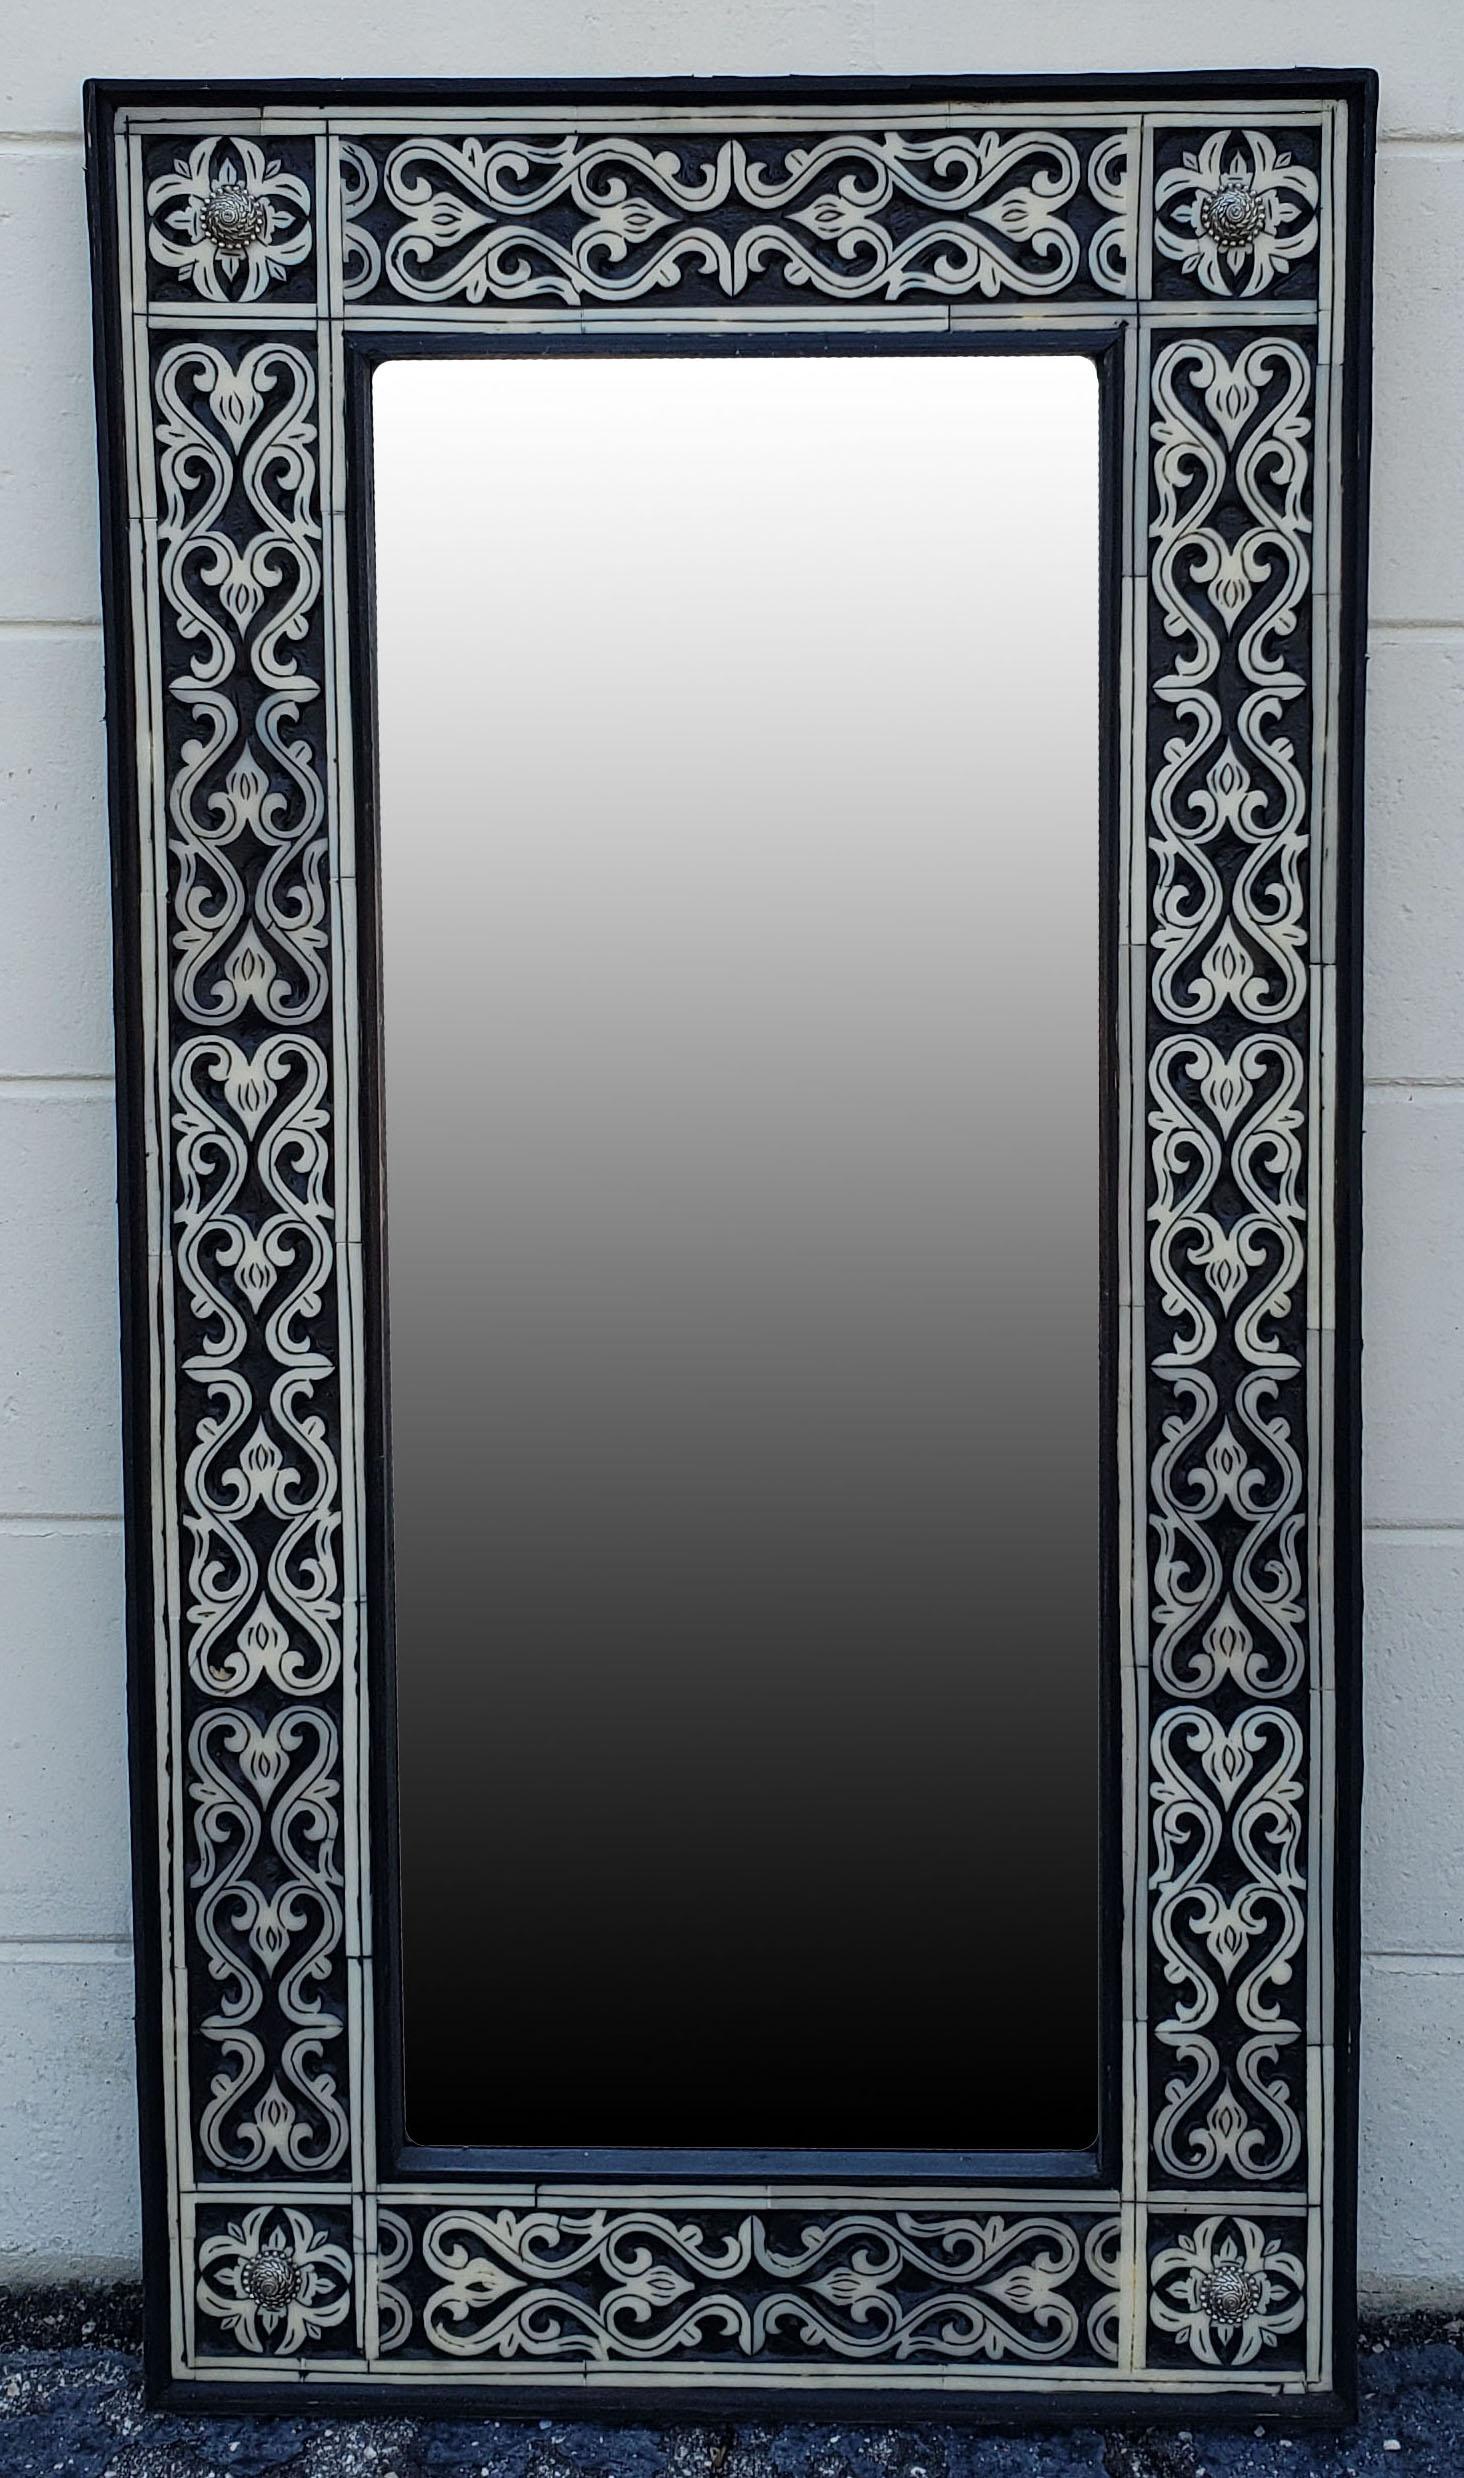 A few decades old.
Medium size metal and camel bone inlay Moroccan mirror. Made in the city of Marrakech. Rectangular shape, measuring approximately 40